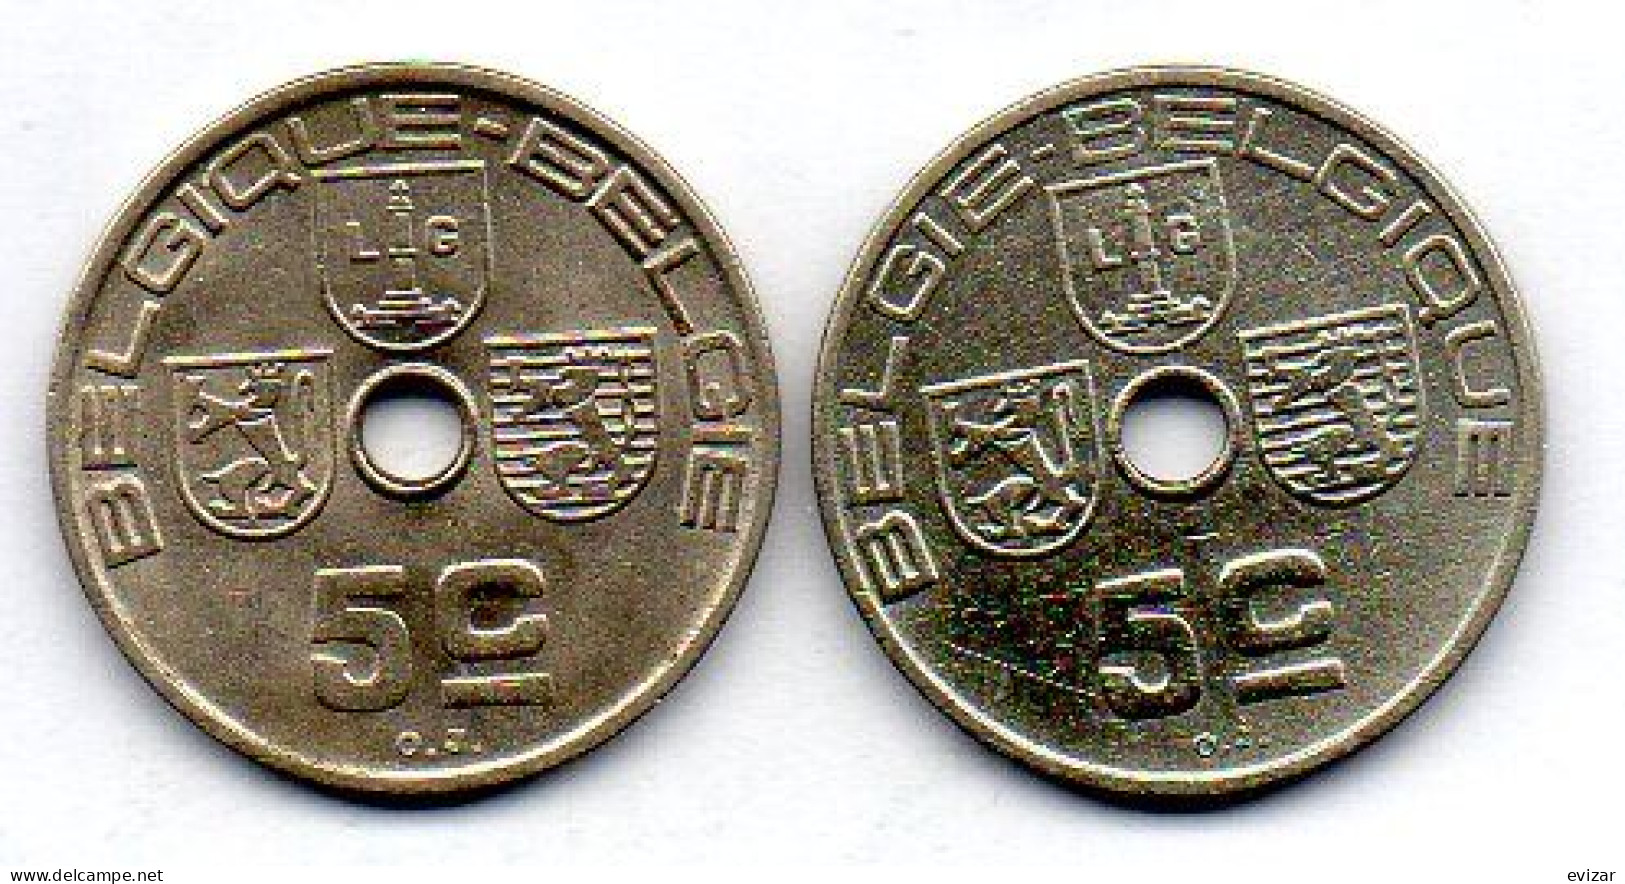 BELGIUM - Set Of Two Coins 5 Centimes, Nickel-Brass, Year 1938, 1939, KM #110.1, 111, French & Dutch Legend - 5 Centimes